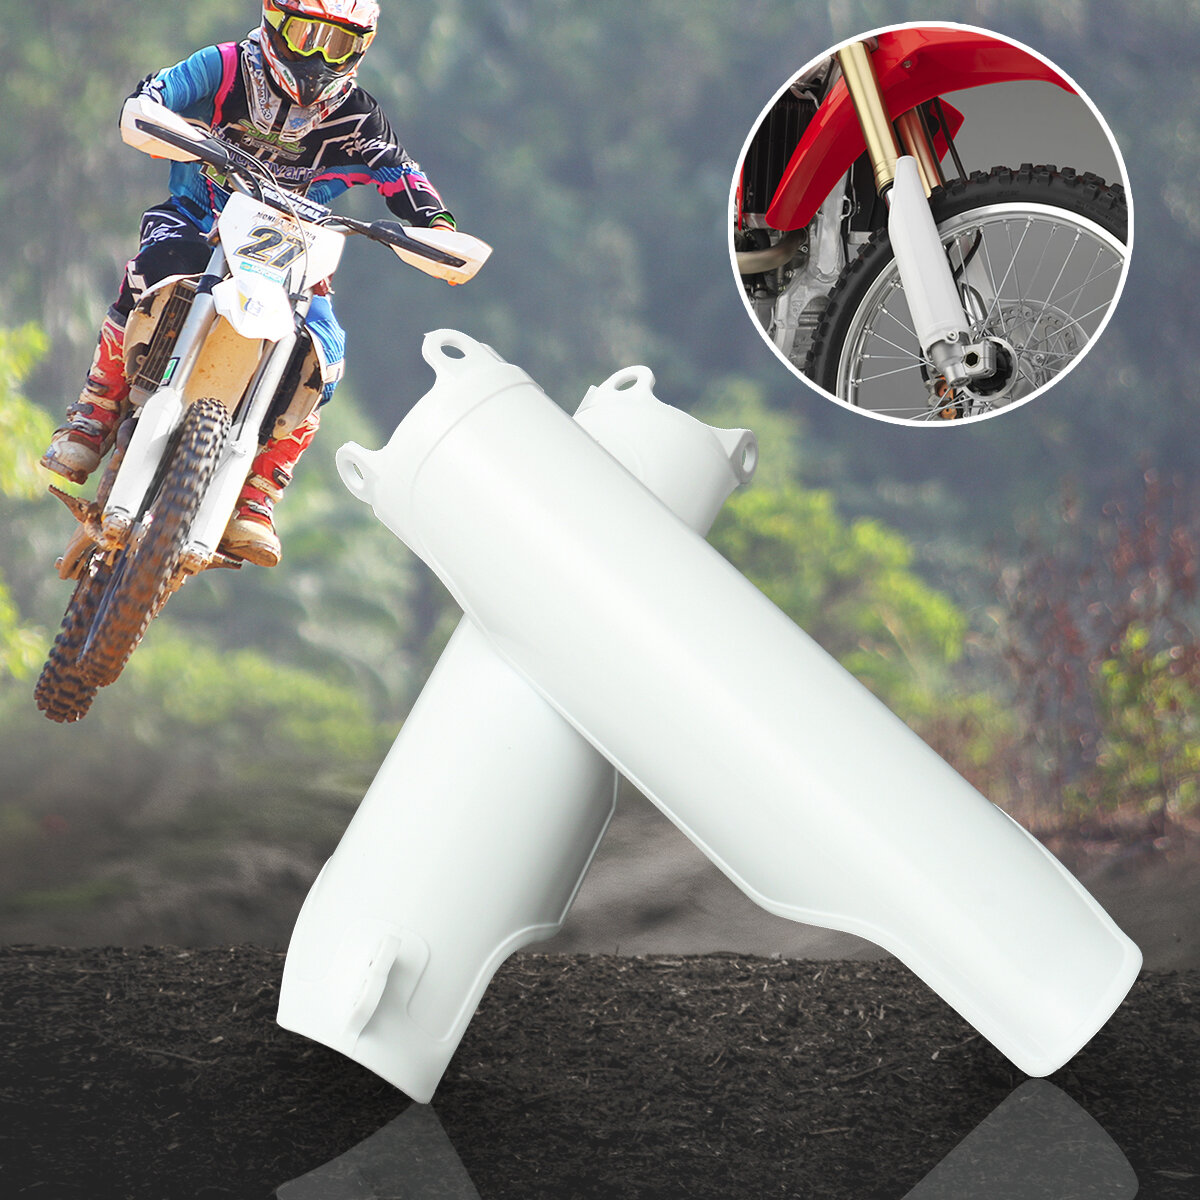 

Fork Guard Cover Plastic For Honda CRF250 CRF450 2004-2012 CRF250R CRF450R